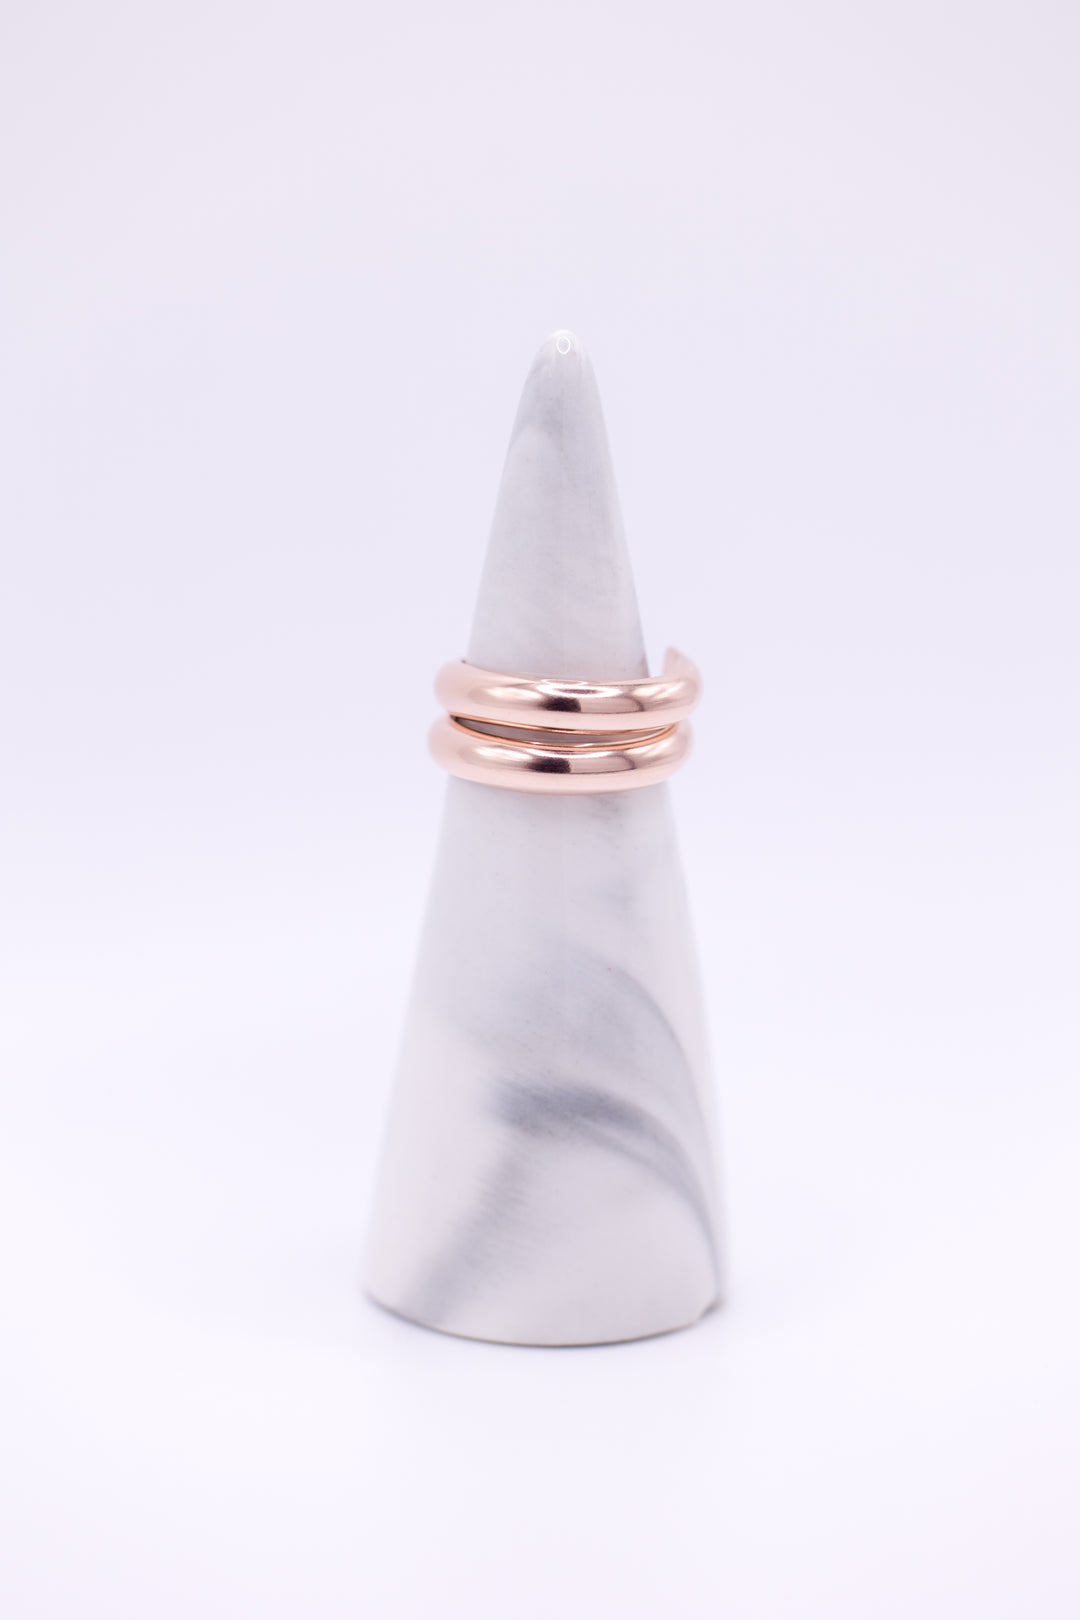 Rose Gold Ring by Anna Shae Jewelry in Lexington, Kentucky